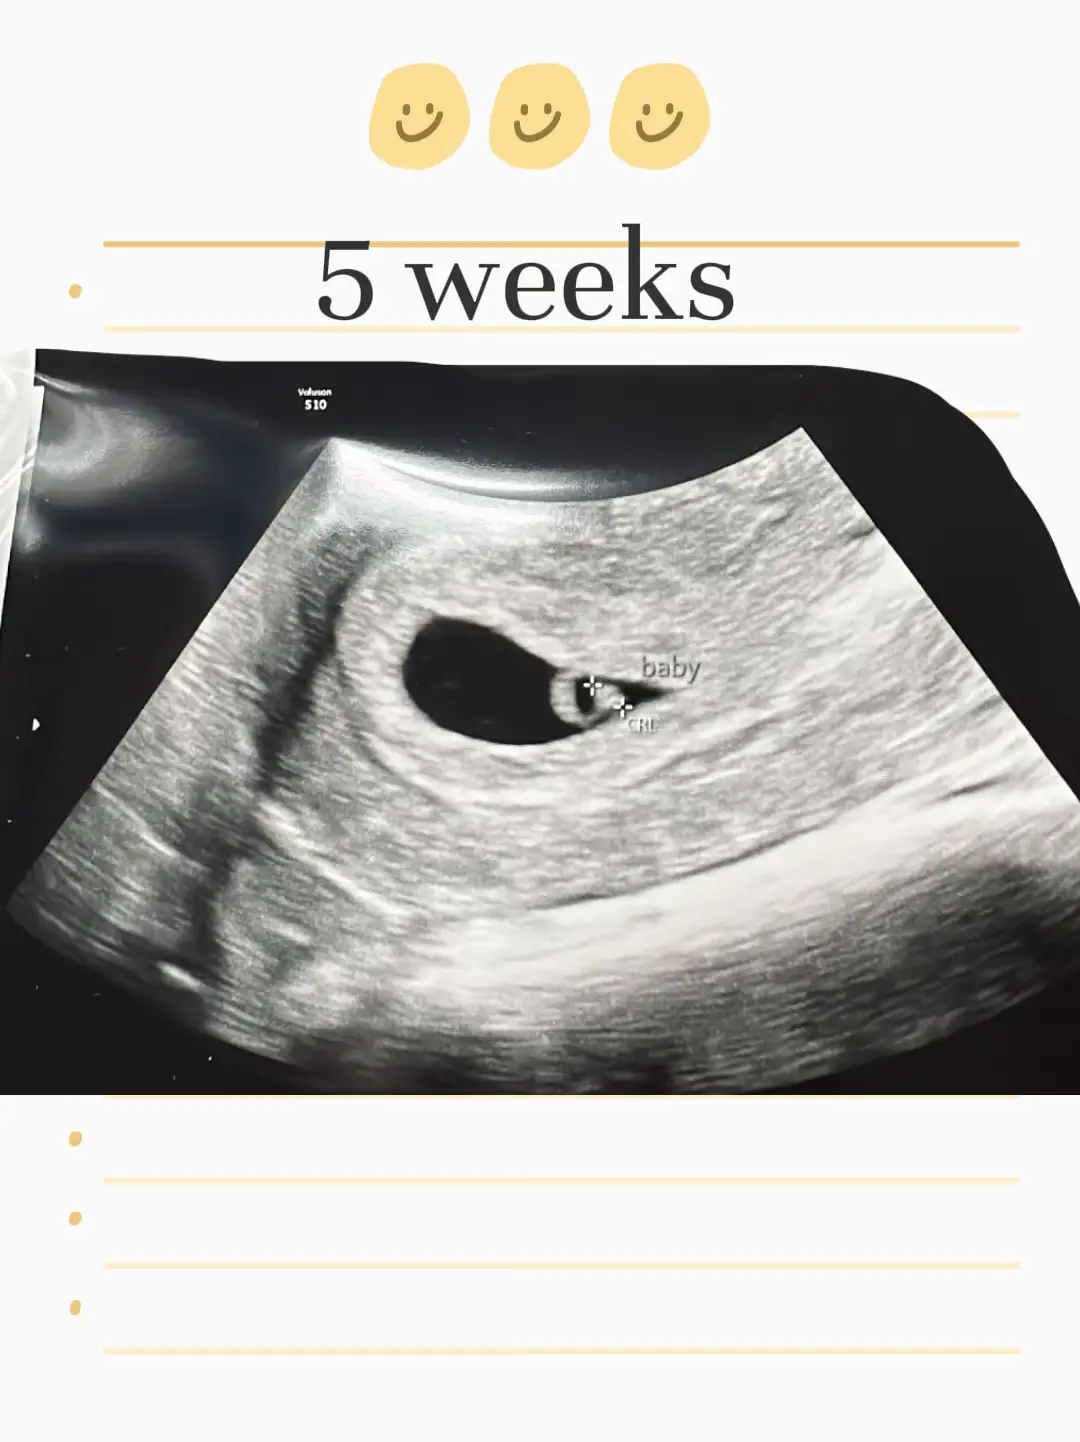 7w5d Brown Discharge? Tmi pic - May 2019 Babies, Forums